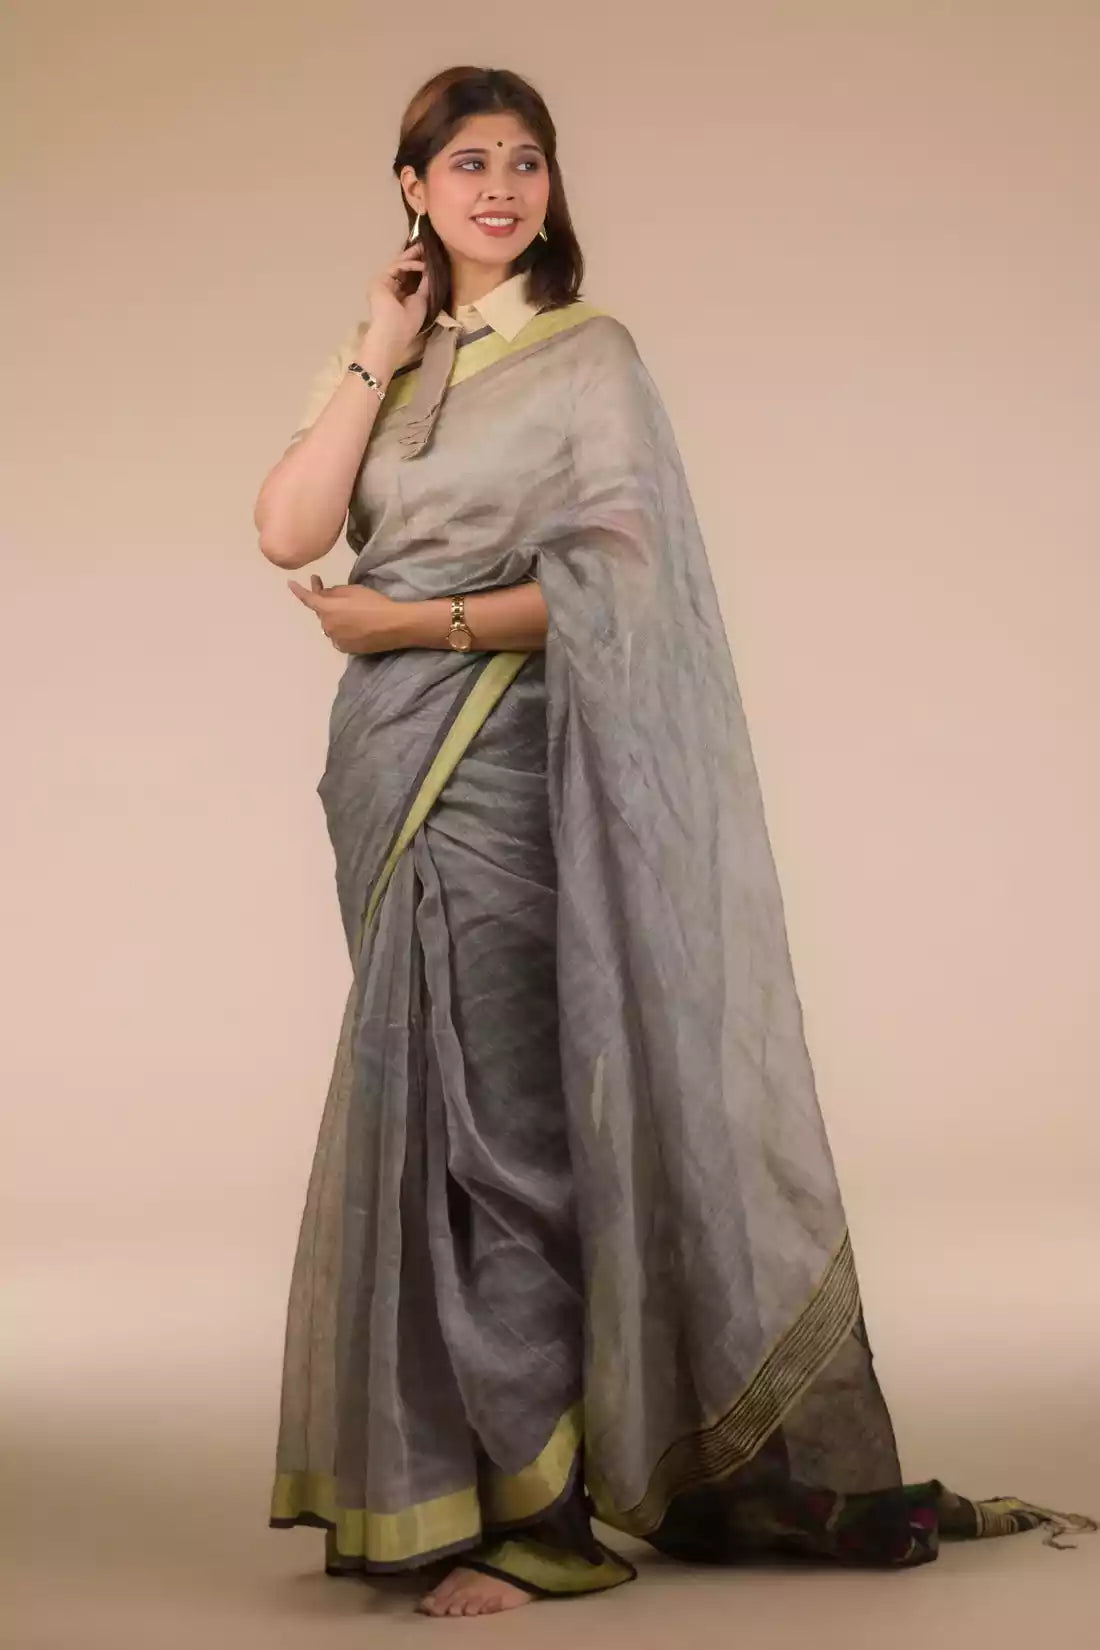 A lady in Grey Silk Linen Jamdani hand weaving Saree standing against a beige background